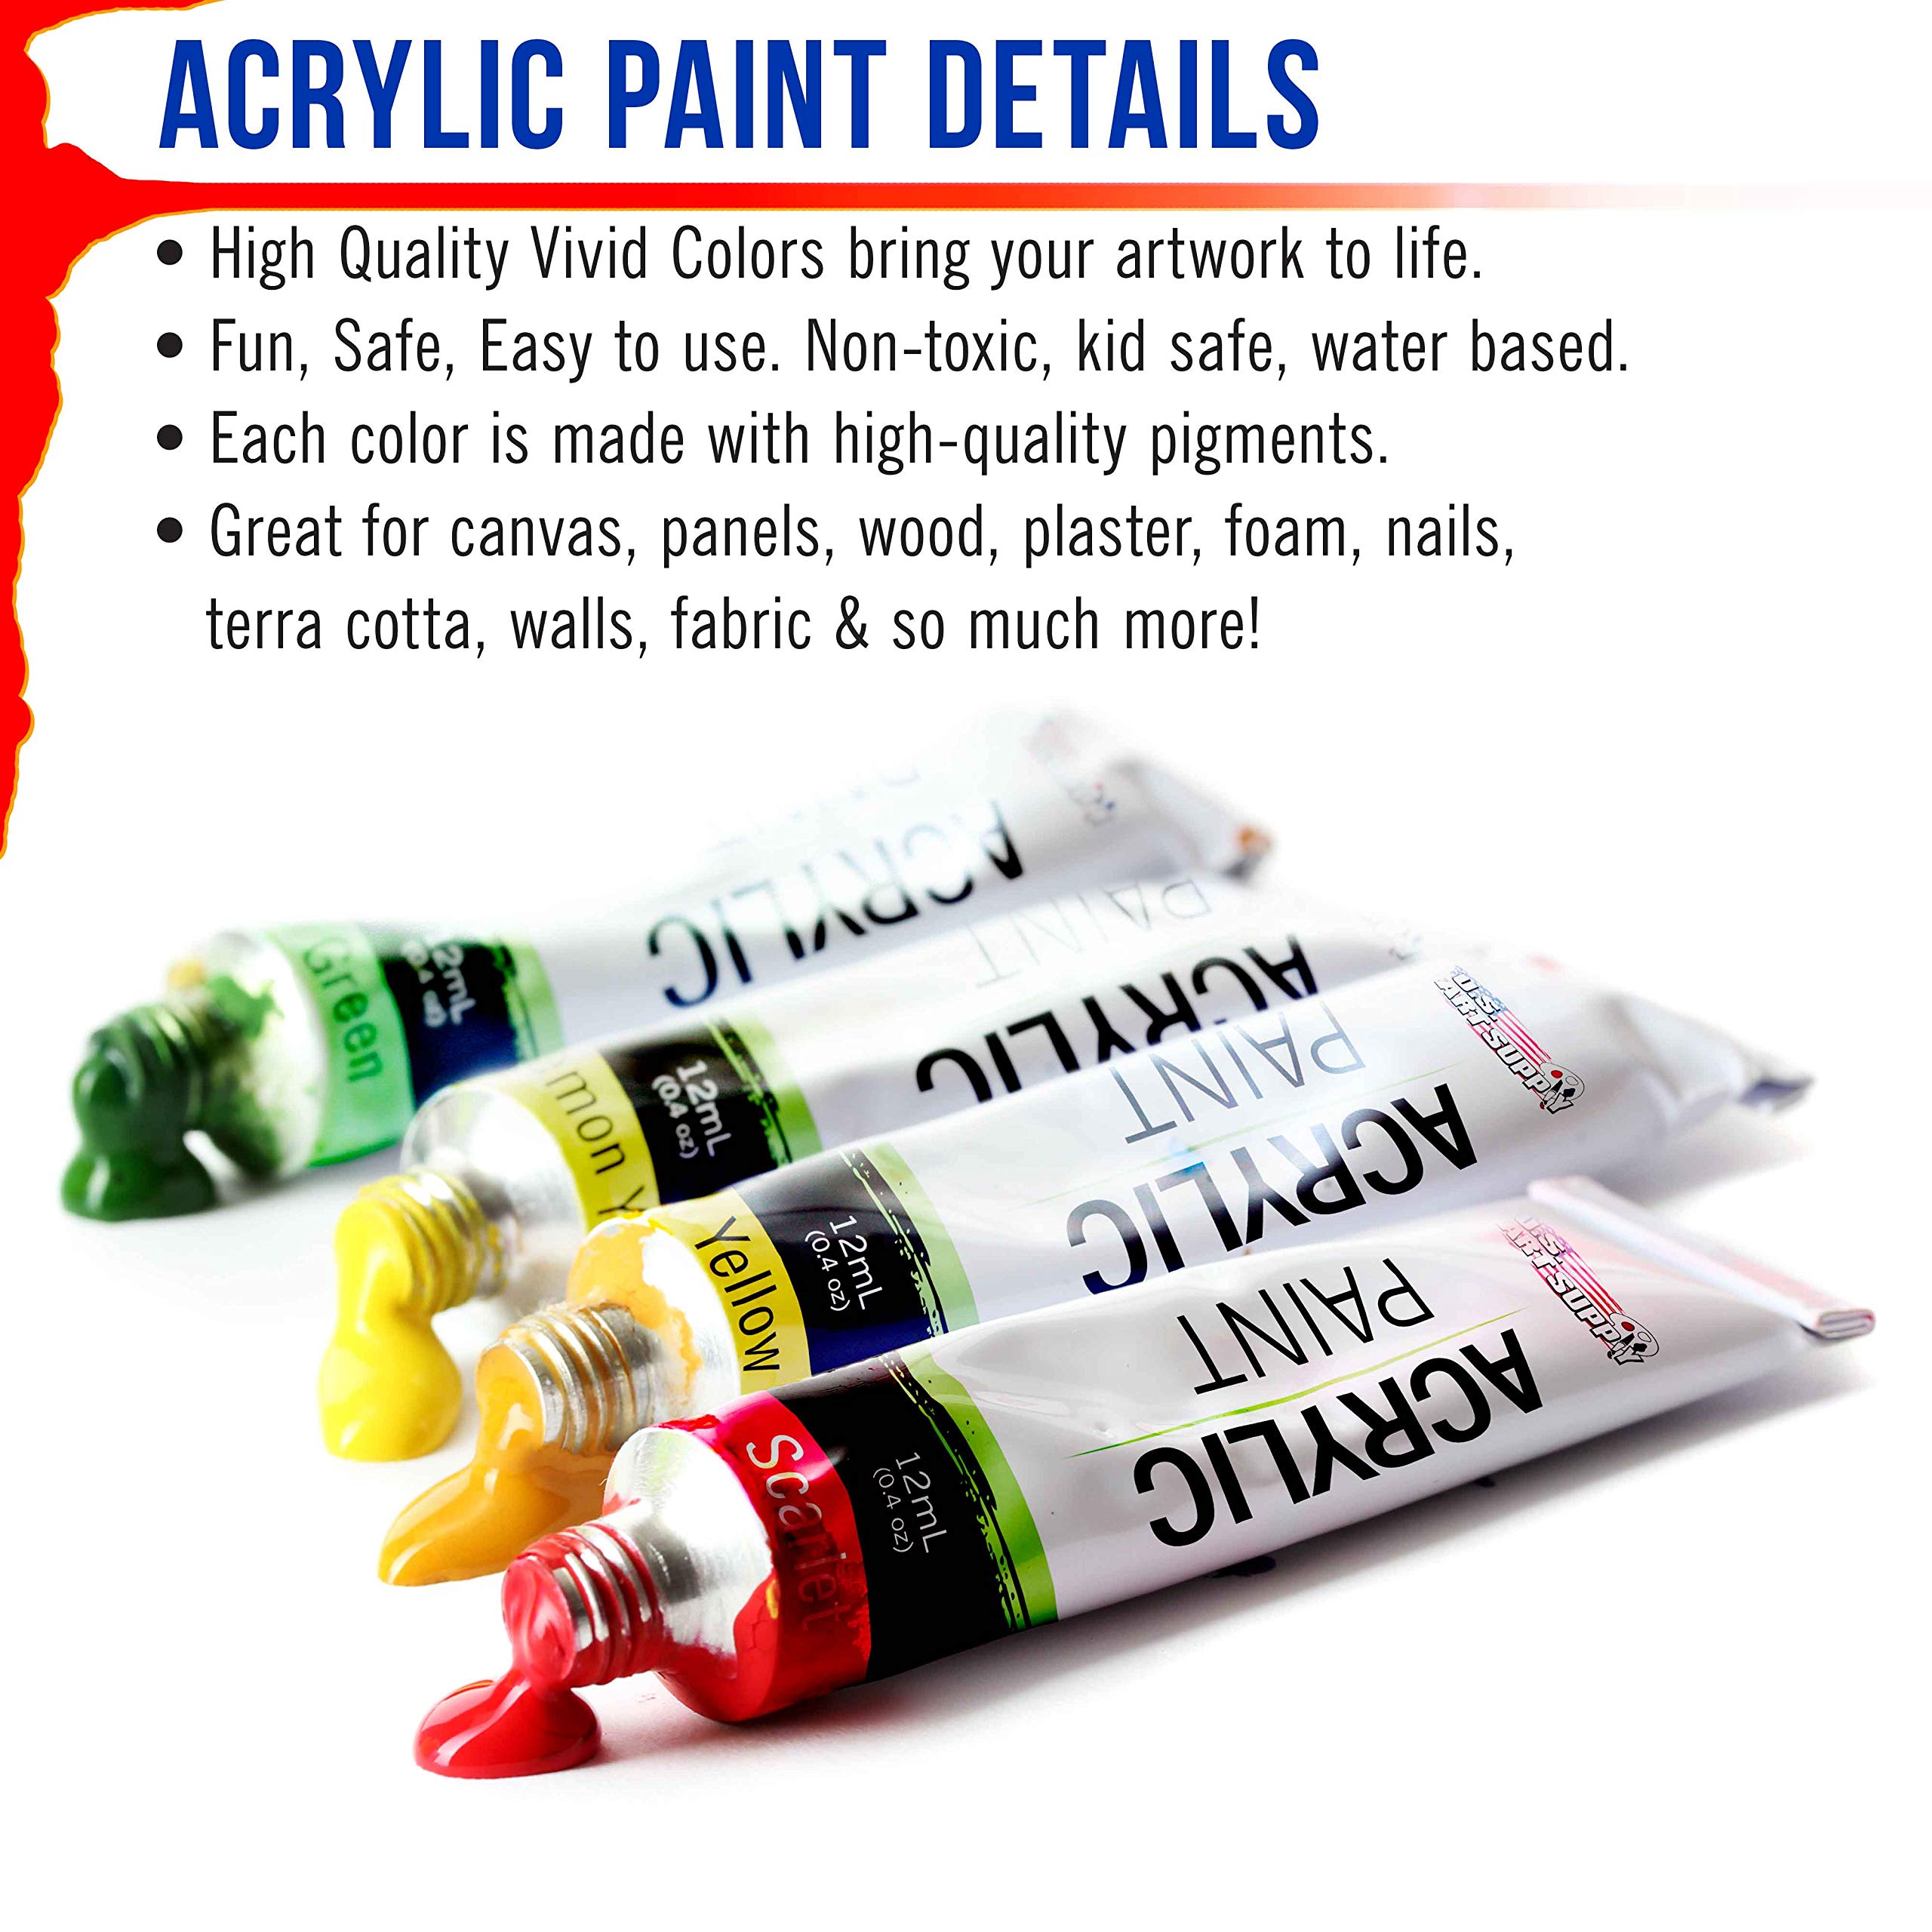 U.S. Art Supply Professional 12 Color Set of Acrylic Paint in 12ml Tubes - Rich Pigment Vivid Colors for Artists, Students, Beginners, Kids, Adults - Canvas, Portrait Paintings, Wood, Craft, Hobby